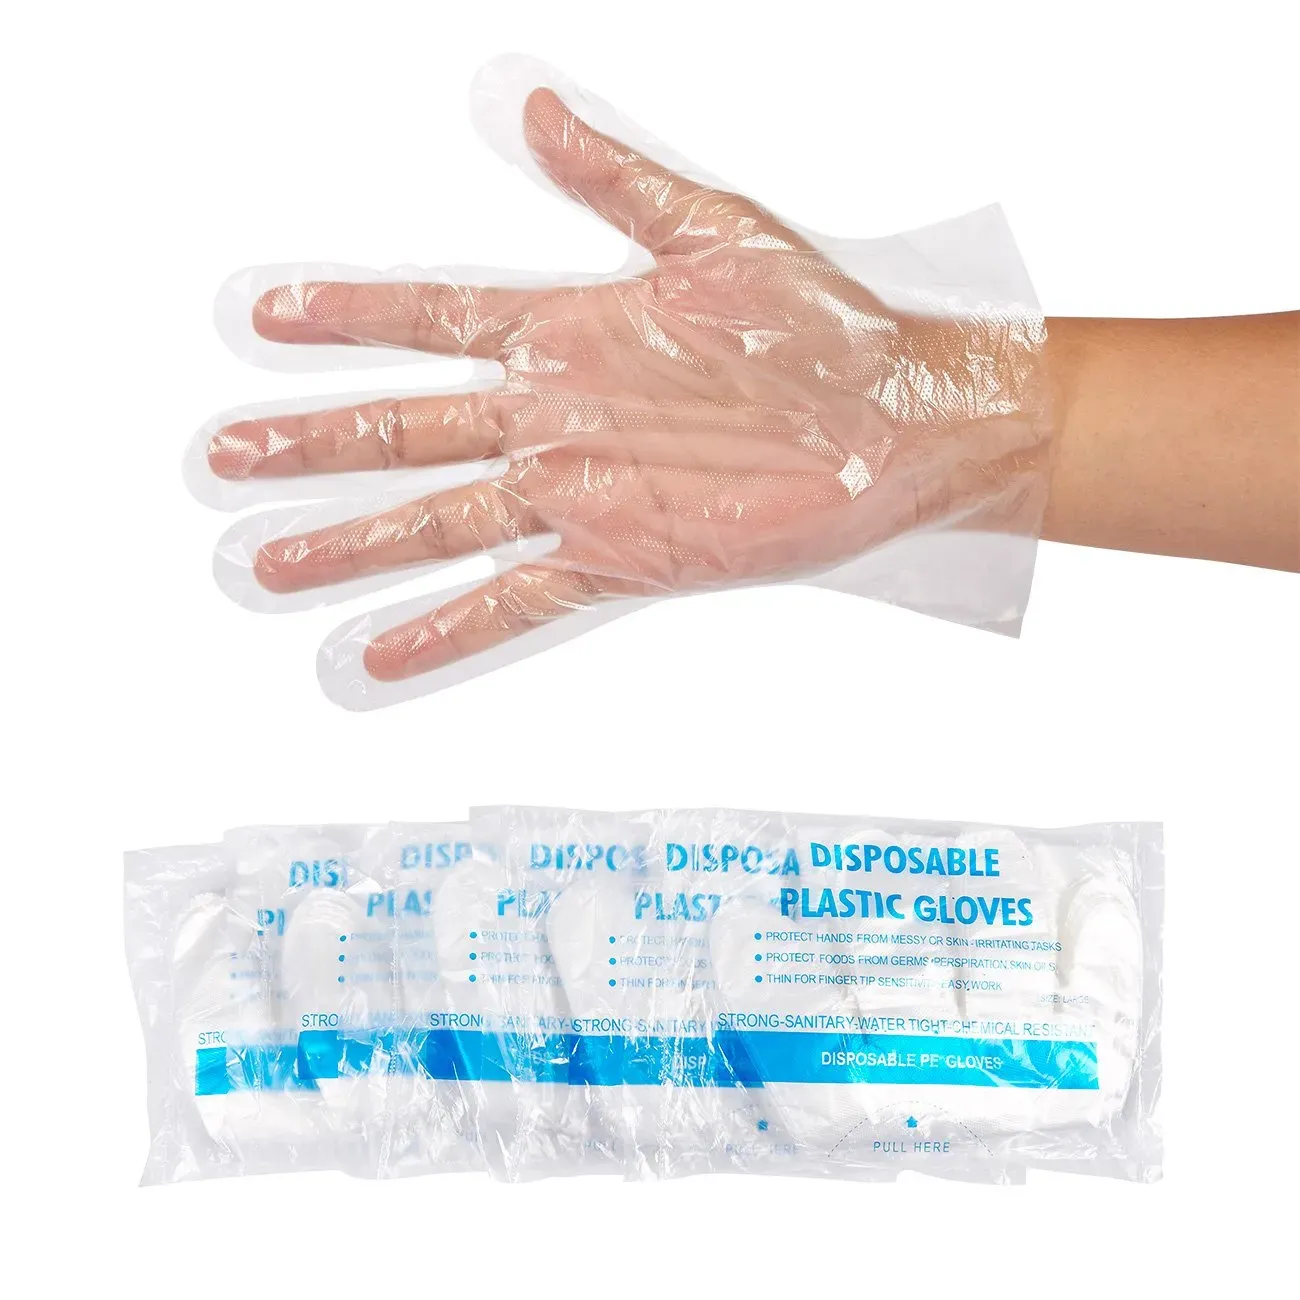 Plastic Disposable Gloves Disposable Food Prep Glof PE PolyGloves for Cooking Cleaning Food Handling Household Cleaning Tools Protect Hand factory outlet